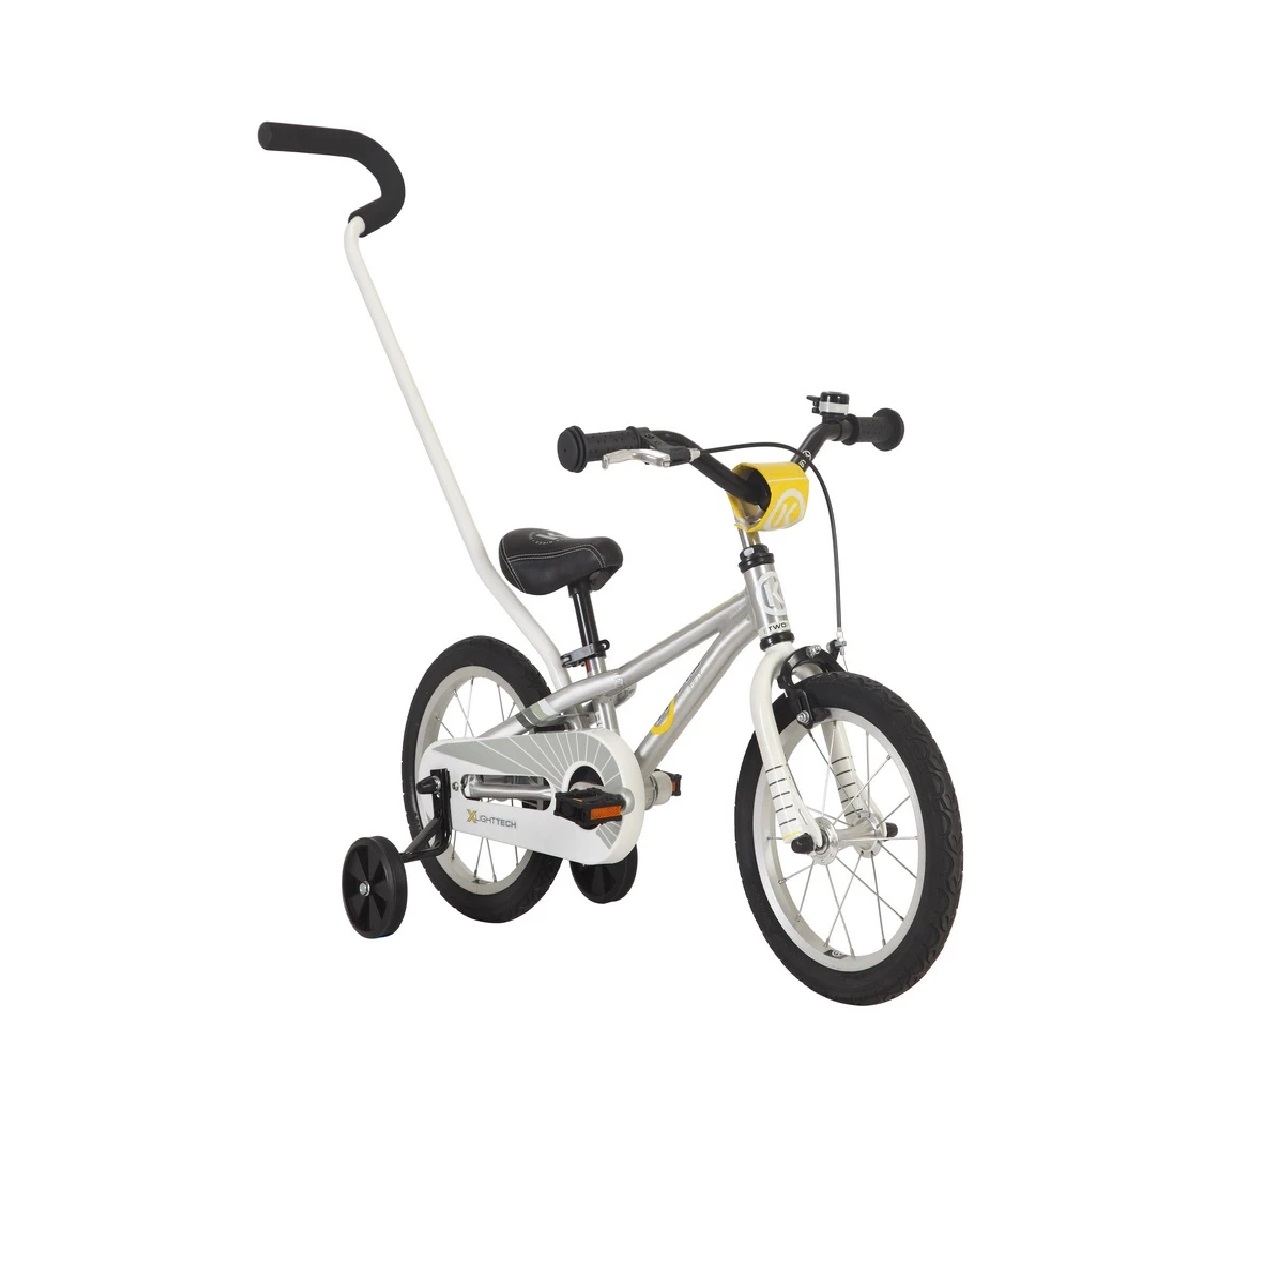 ByK E-250 14" Kids first Bike Age: 2-5 Years Learning to ride bike-Silver